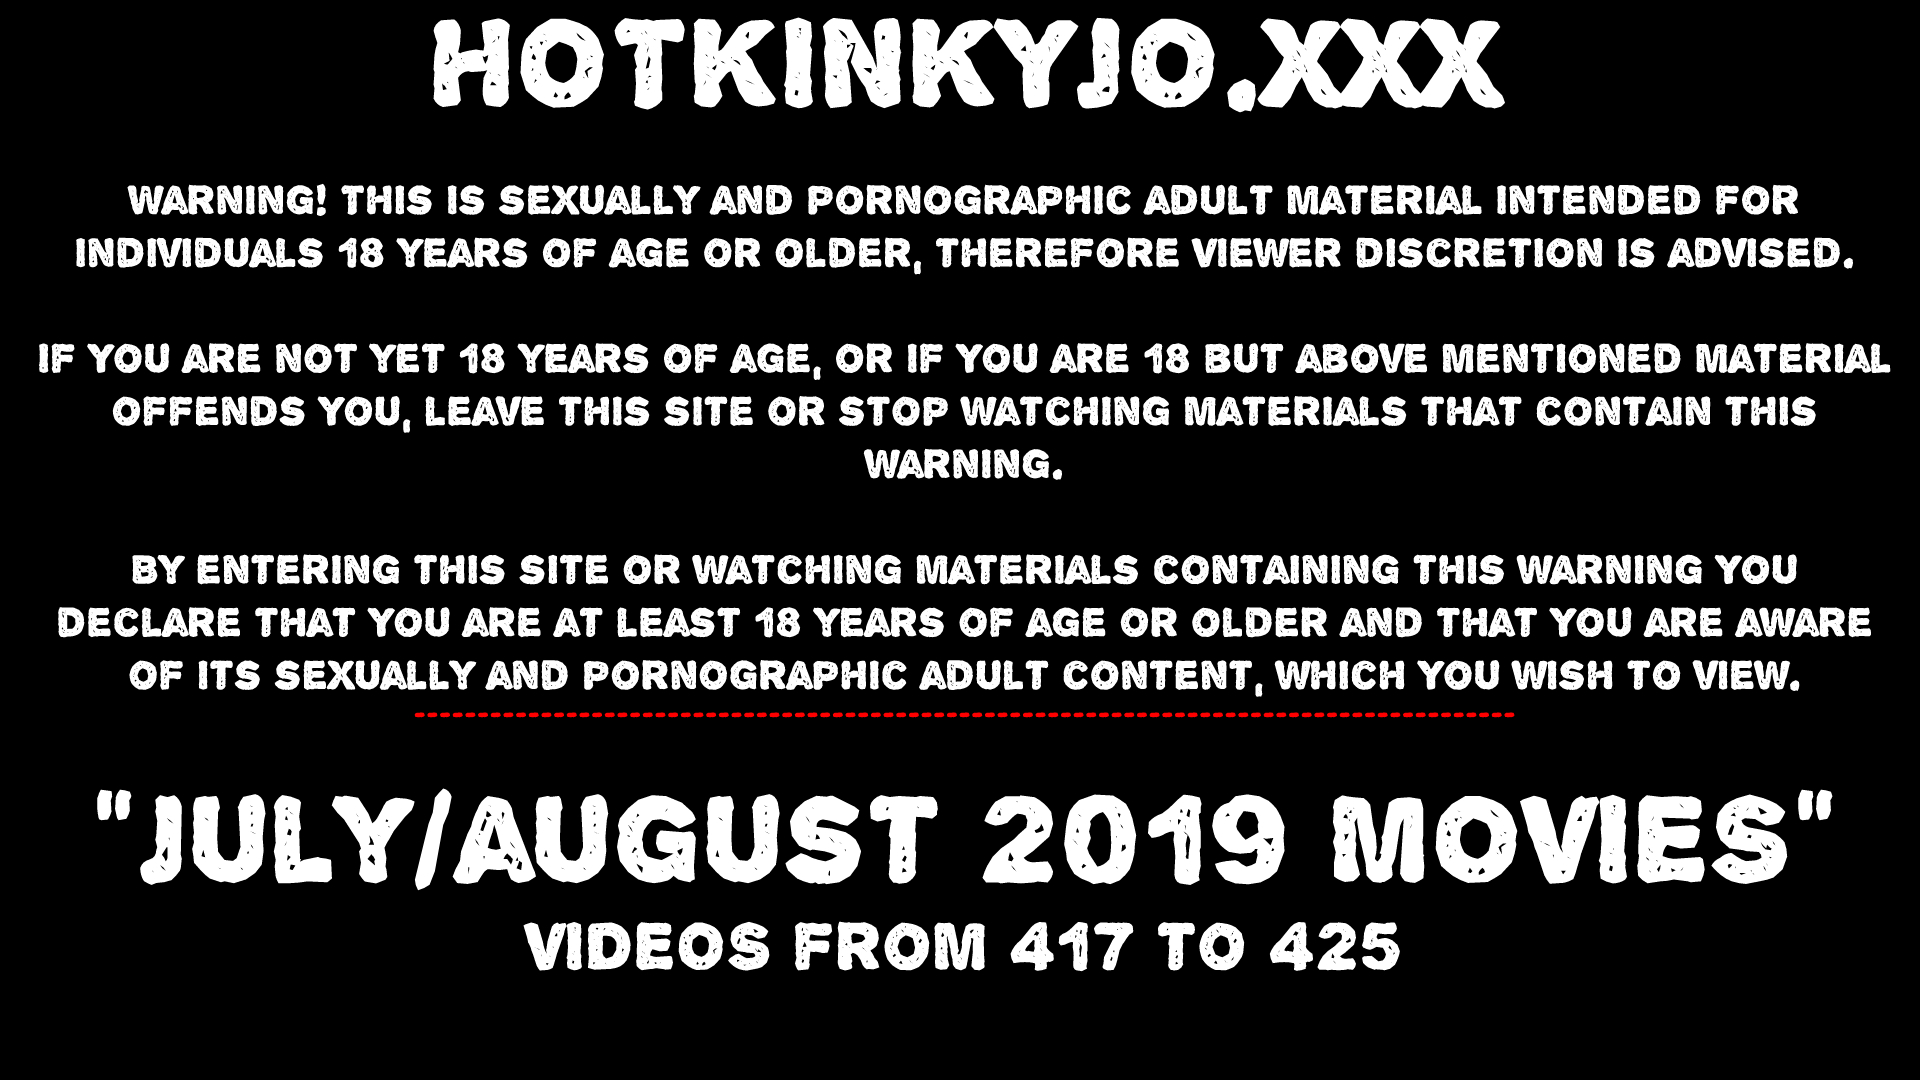 JULY/AUG News at HOTKINKYJO: extreme anal fisting, prolapse, public nudity  - ThisVid.com